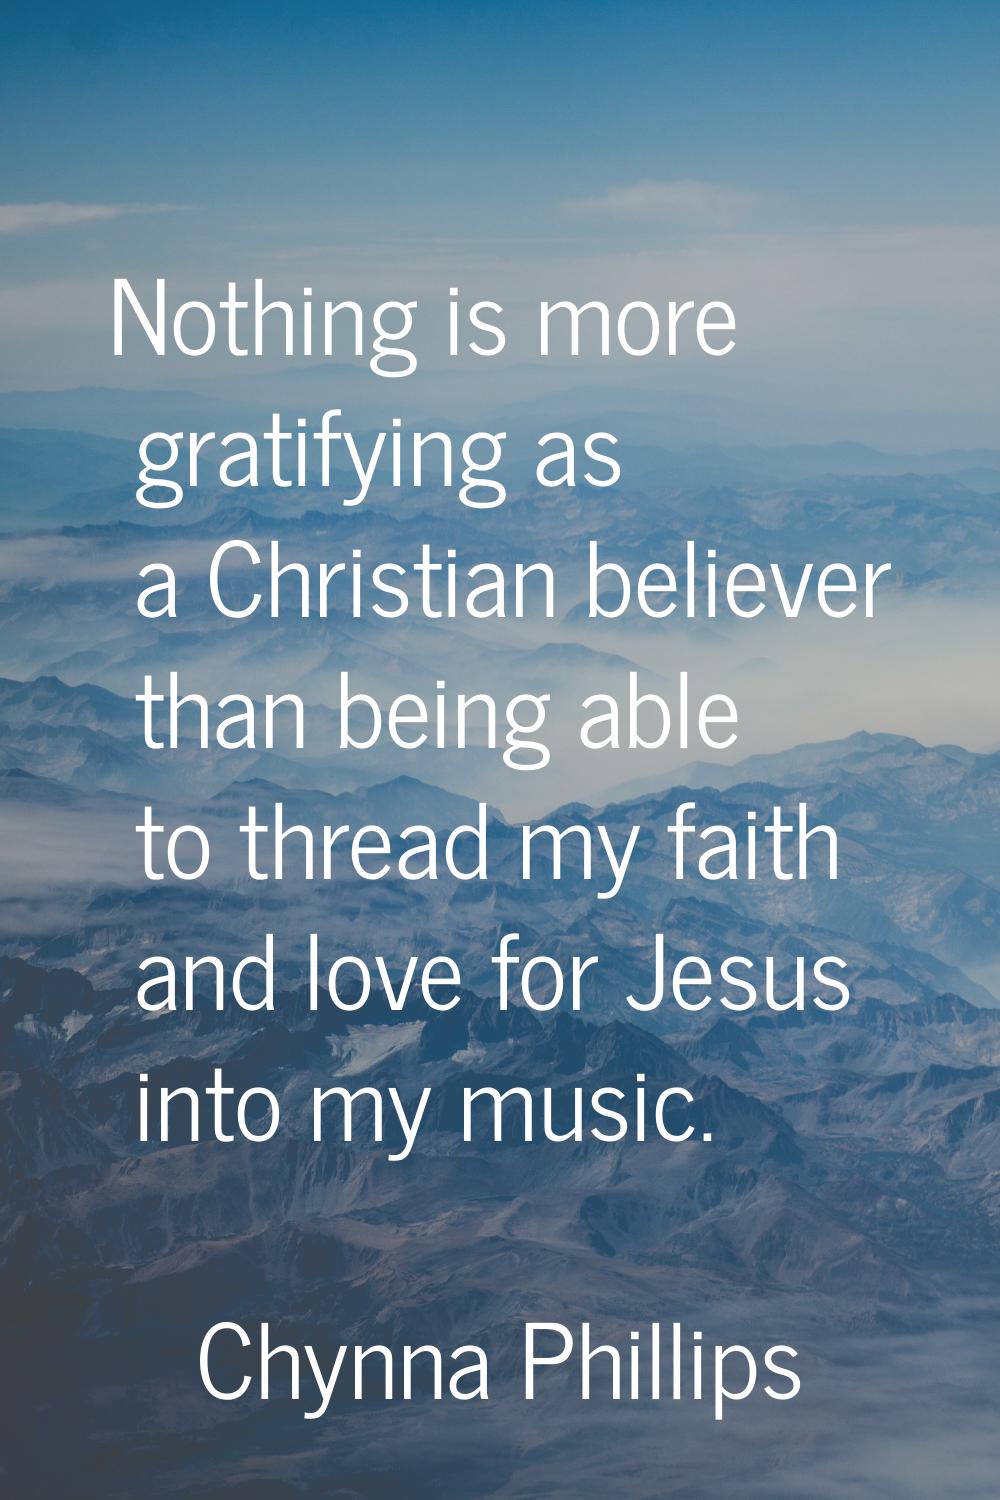 Nothing is more gratifying as a Christian believer than being able to thread my faith and love for 